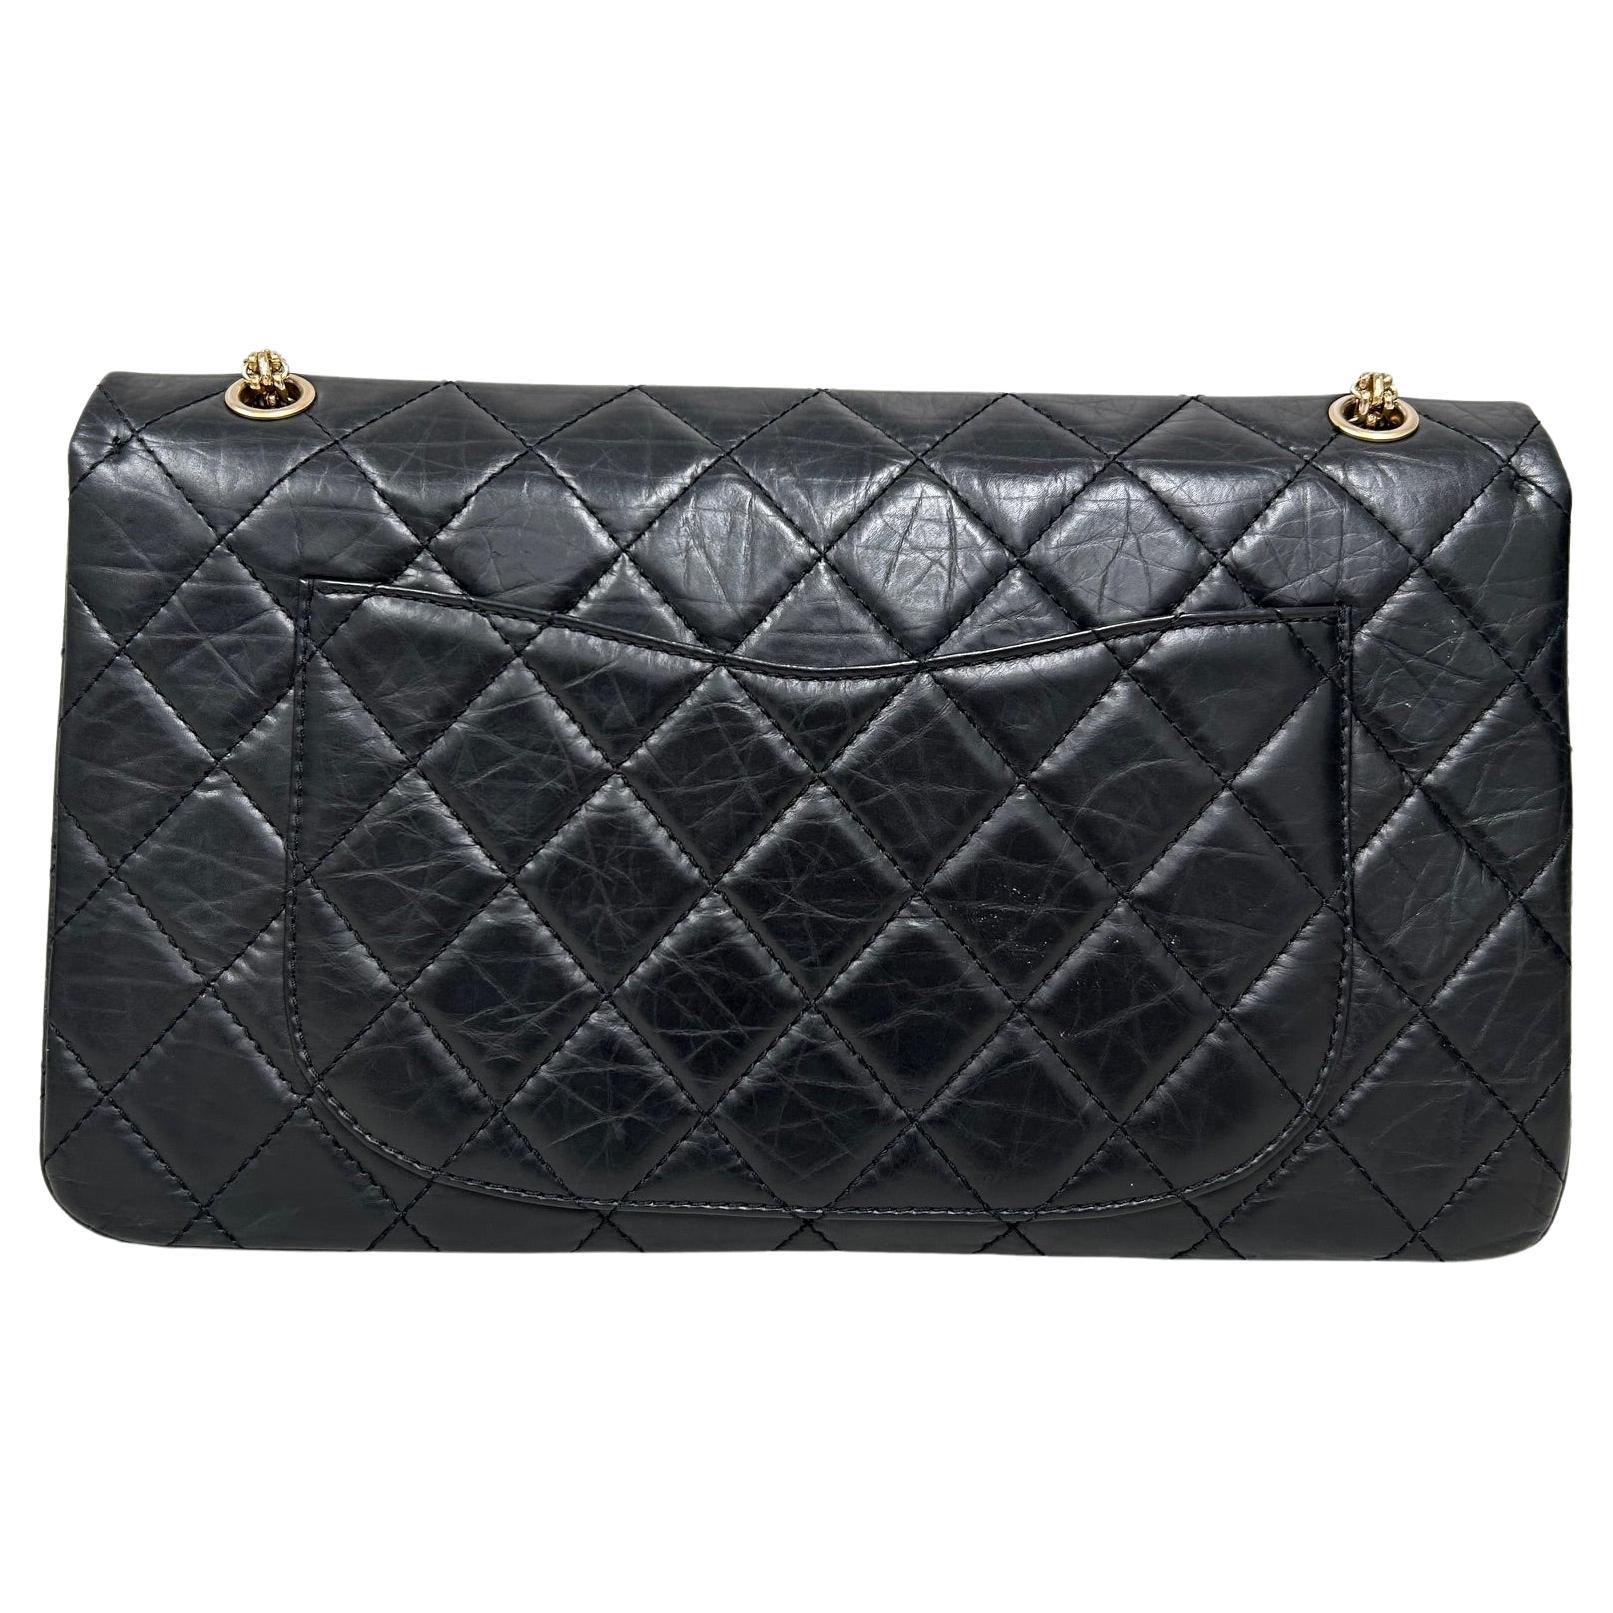 Black Chanel 255 Reissue Classic Bag For Sale